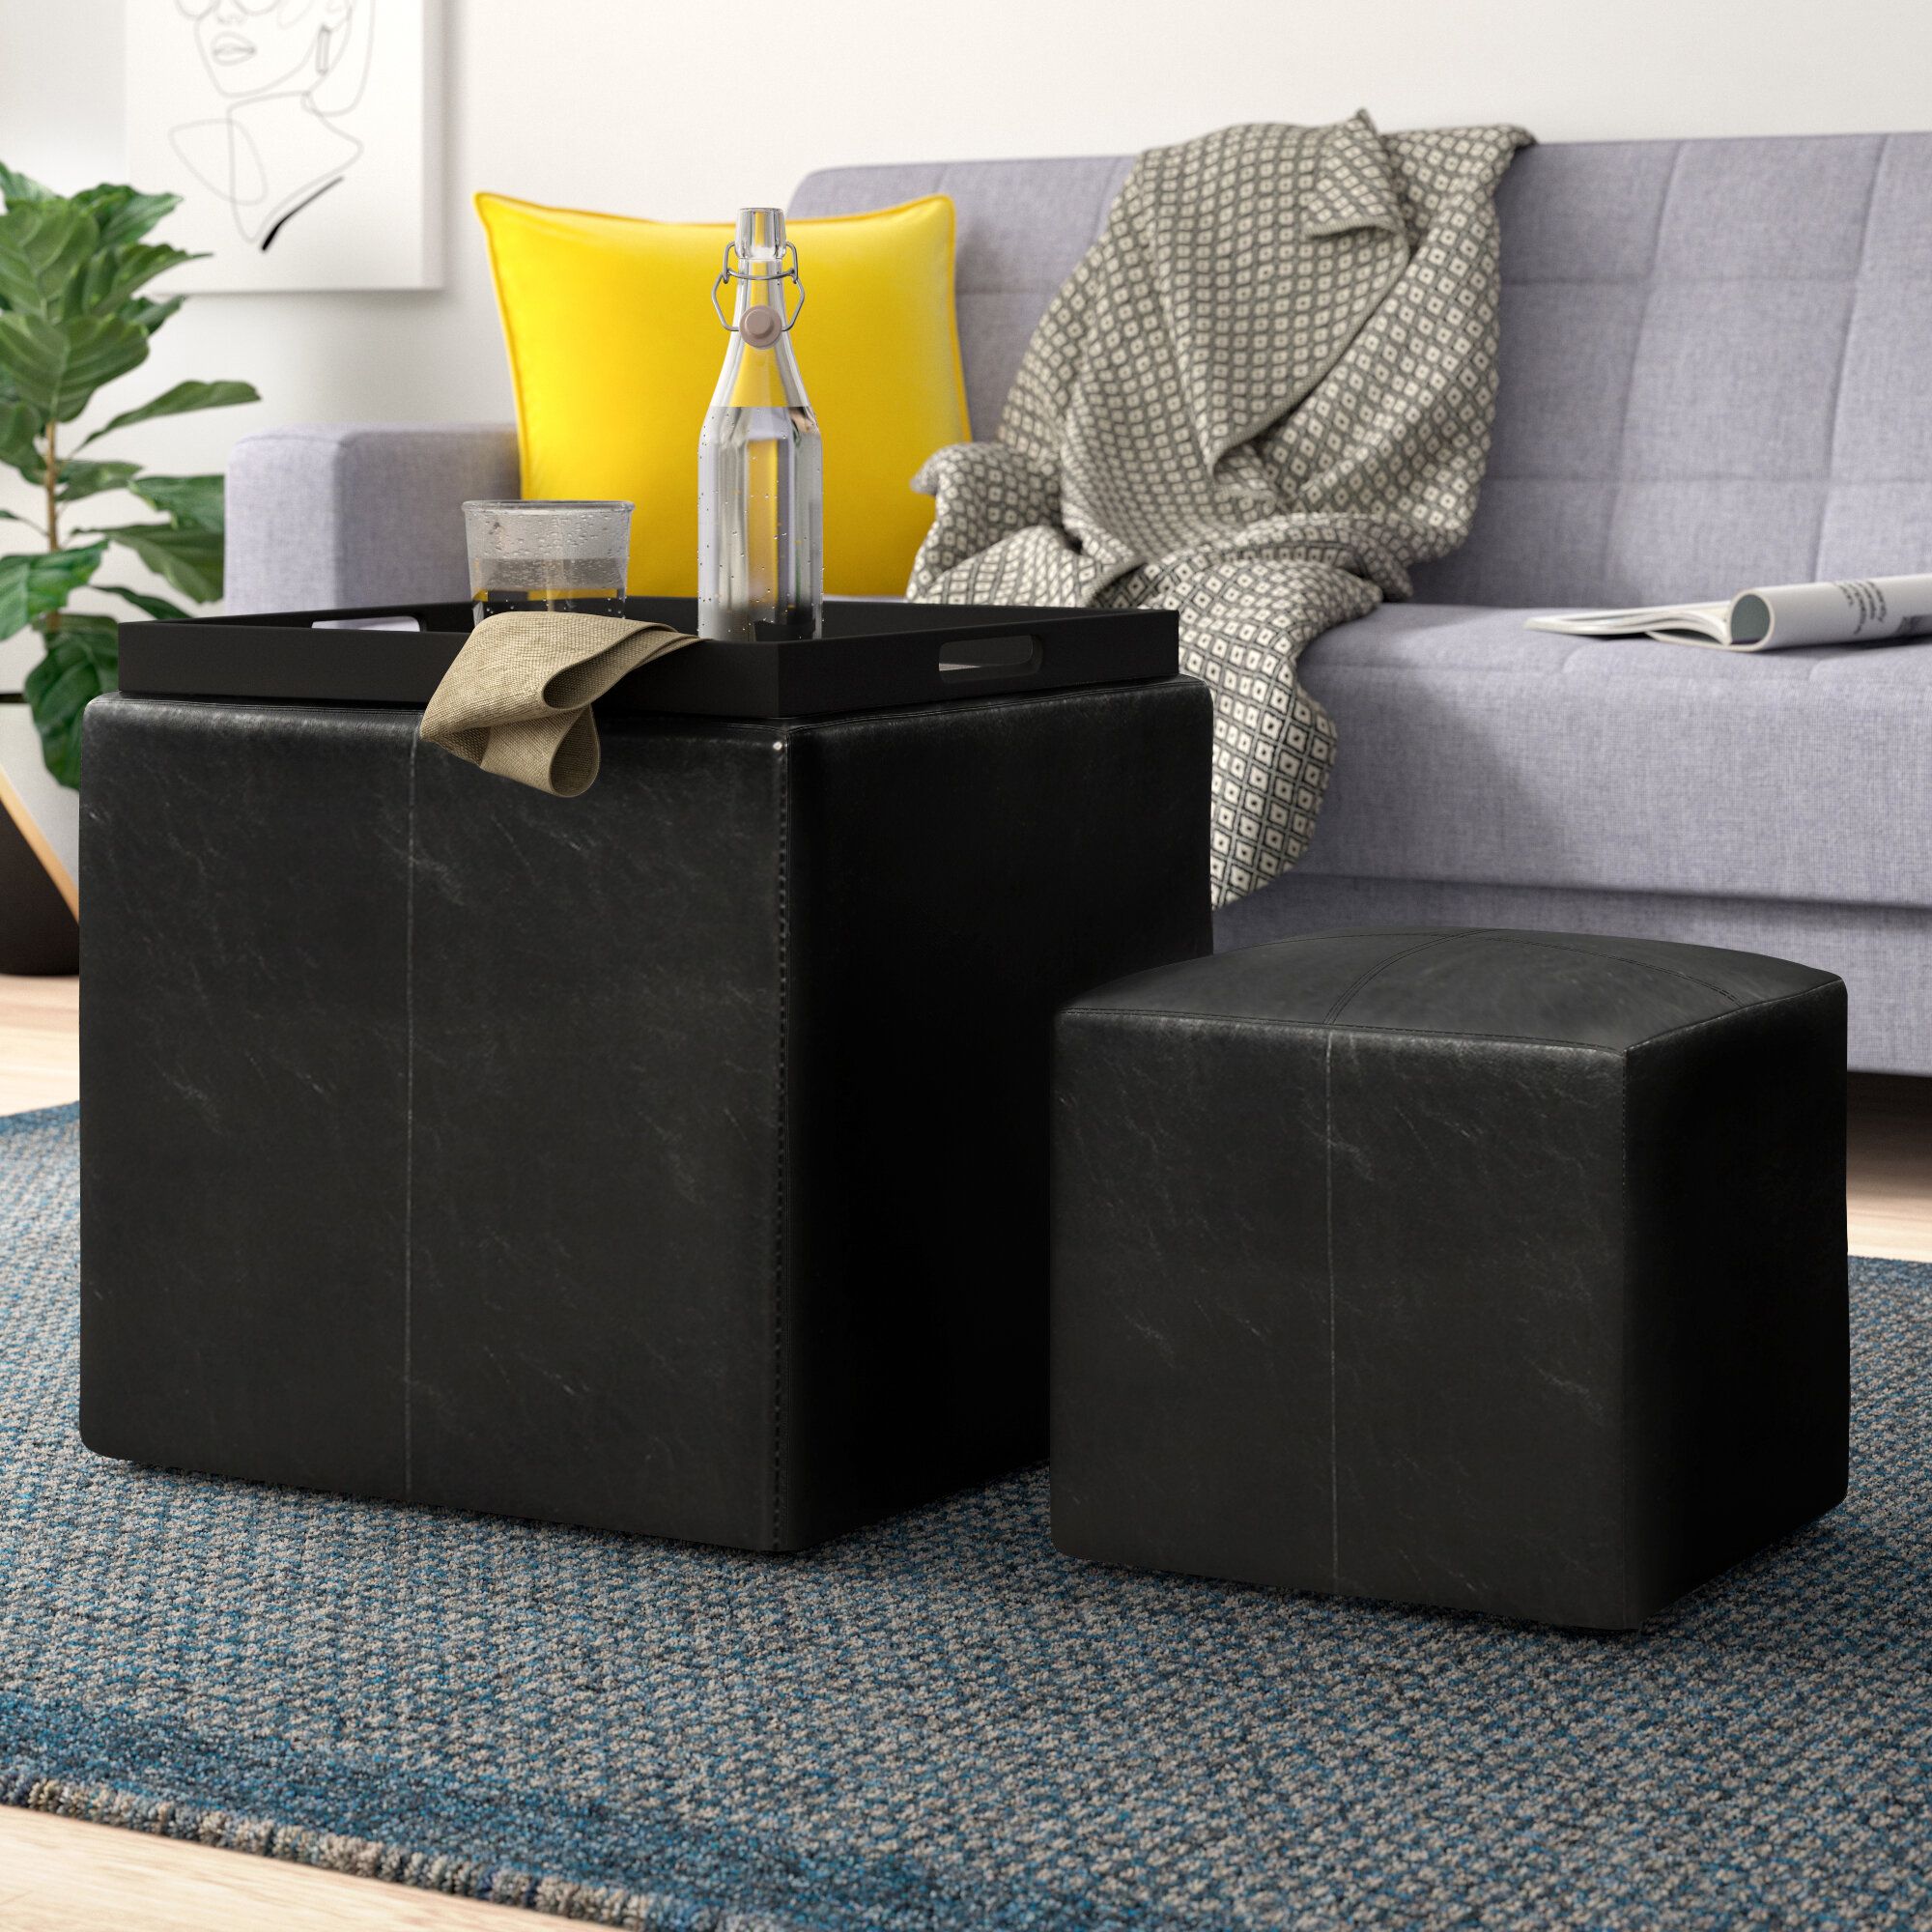 Zipcode Design™ Marla Square Ottoman With Stool And Reversible Tray &  Reviews | Wayfair With Regard To Ottomans With Stool And Reversible Tray (View 1 of 15)